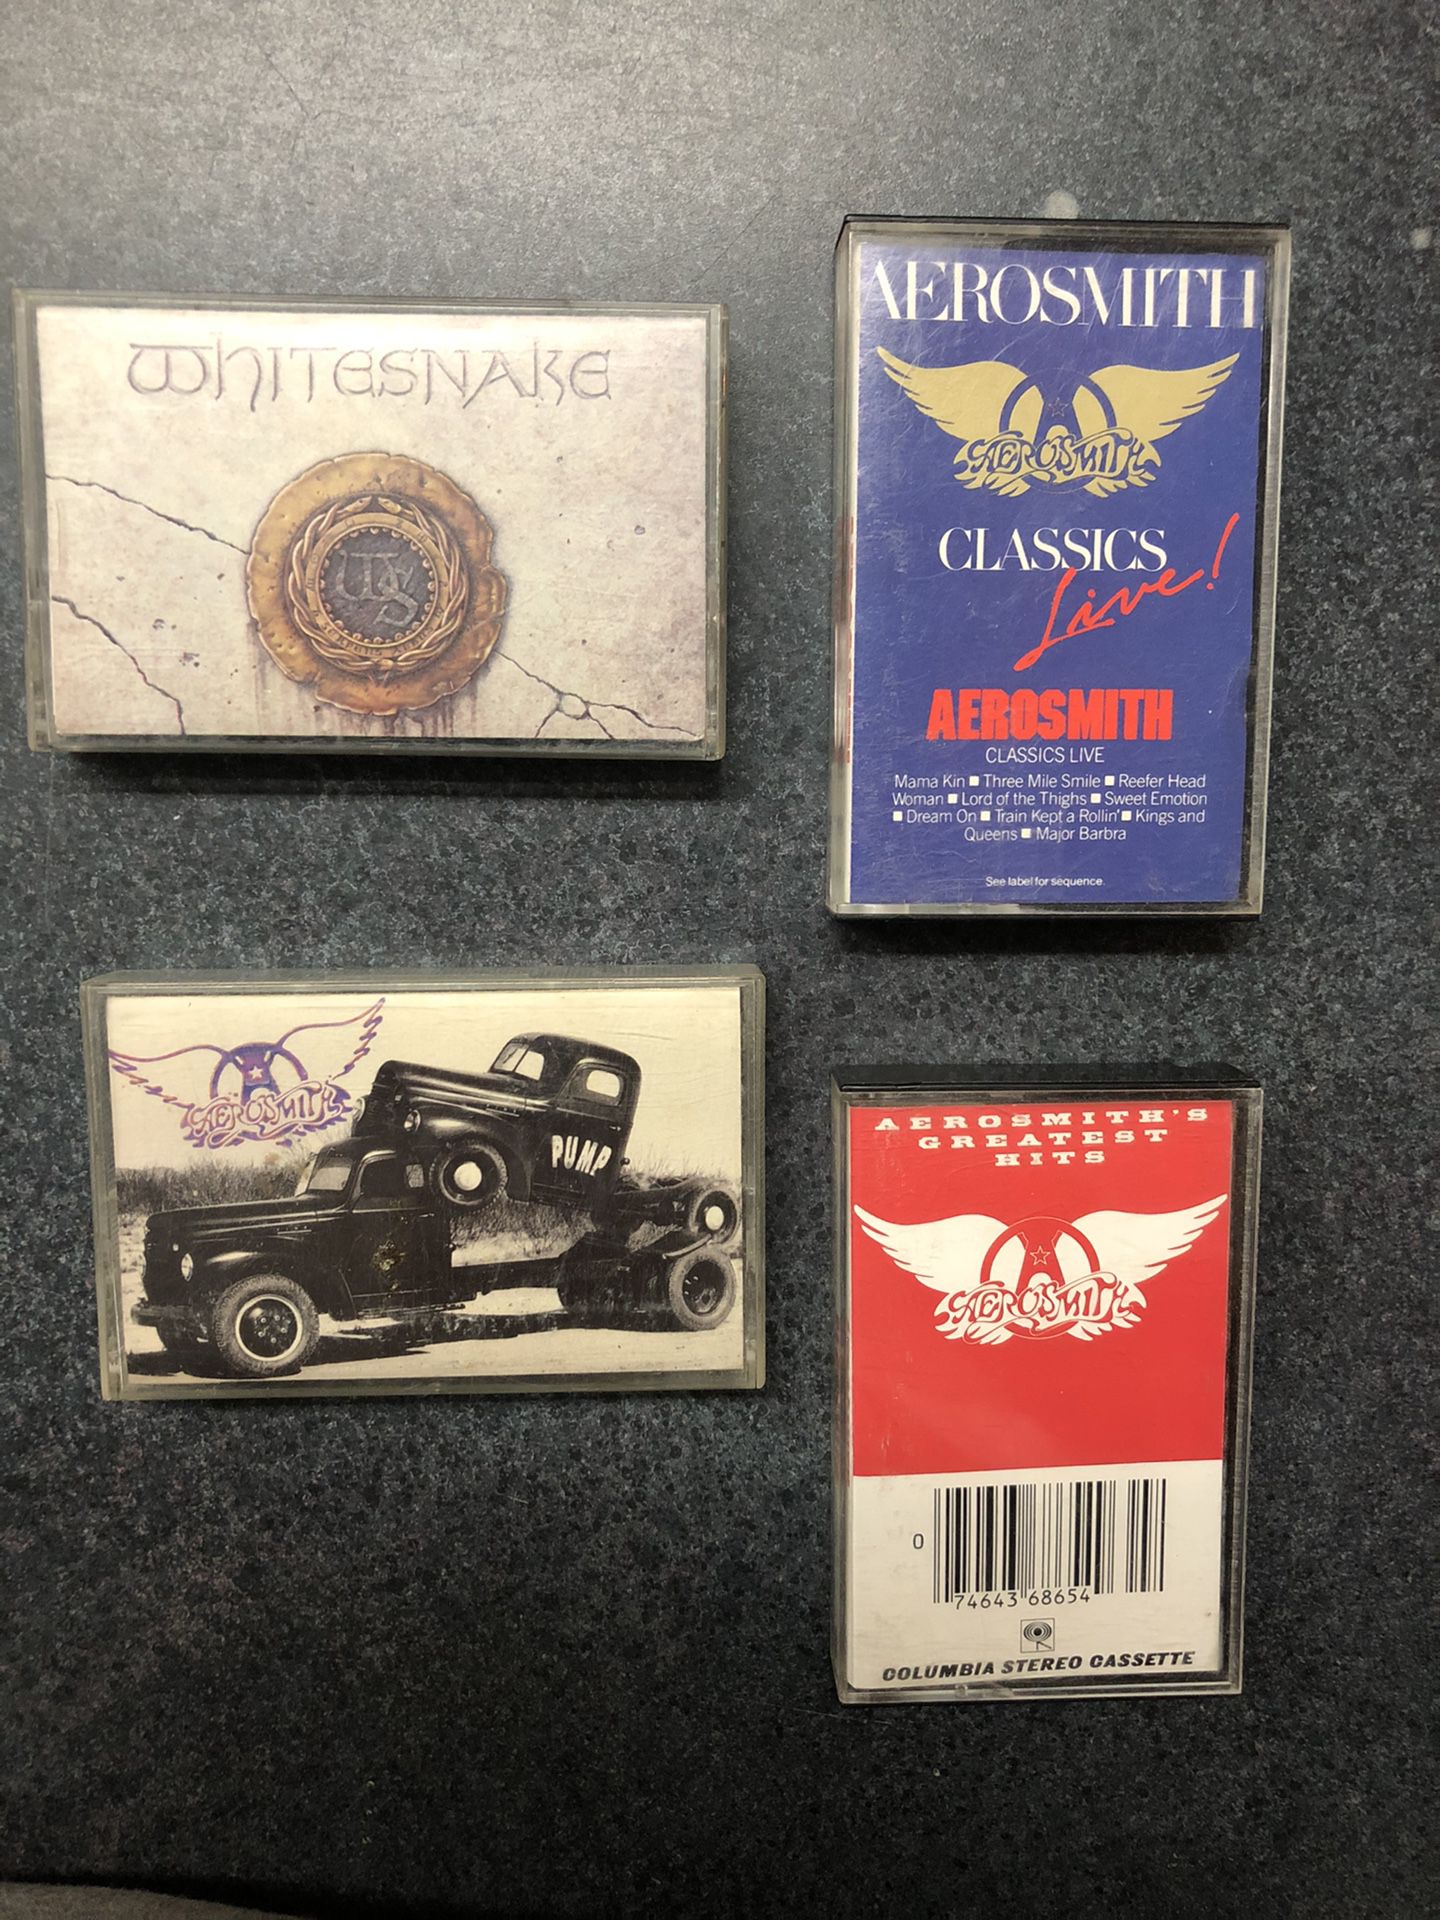 Aerosmith and Whitesnake Cassettes - titles are pictured